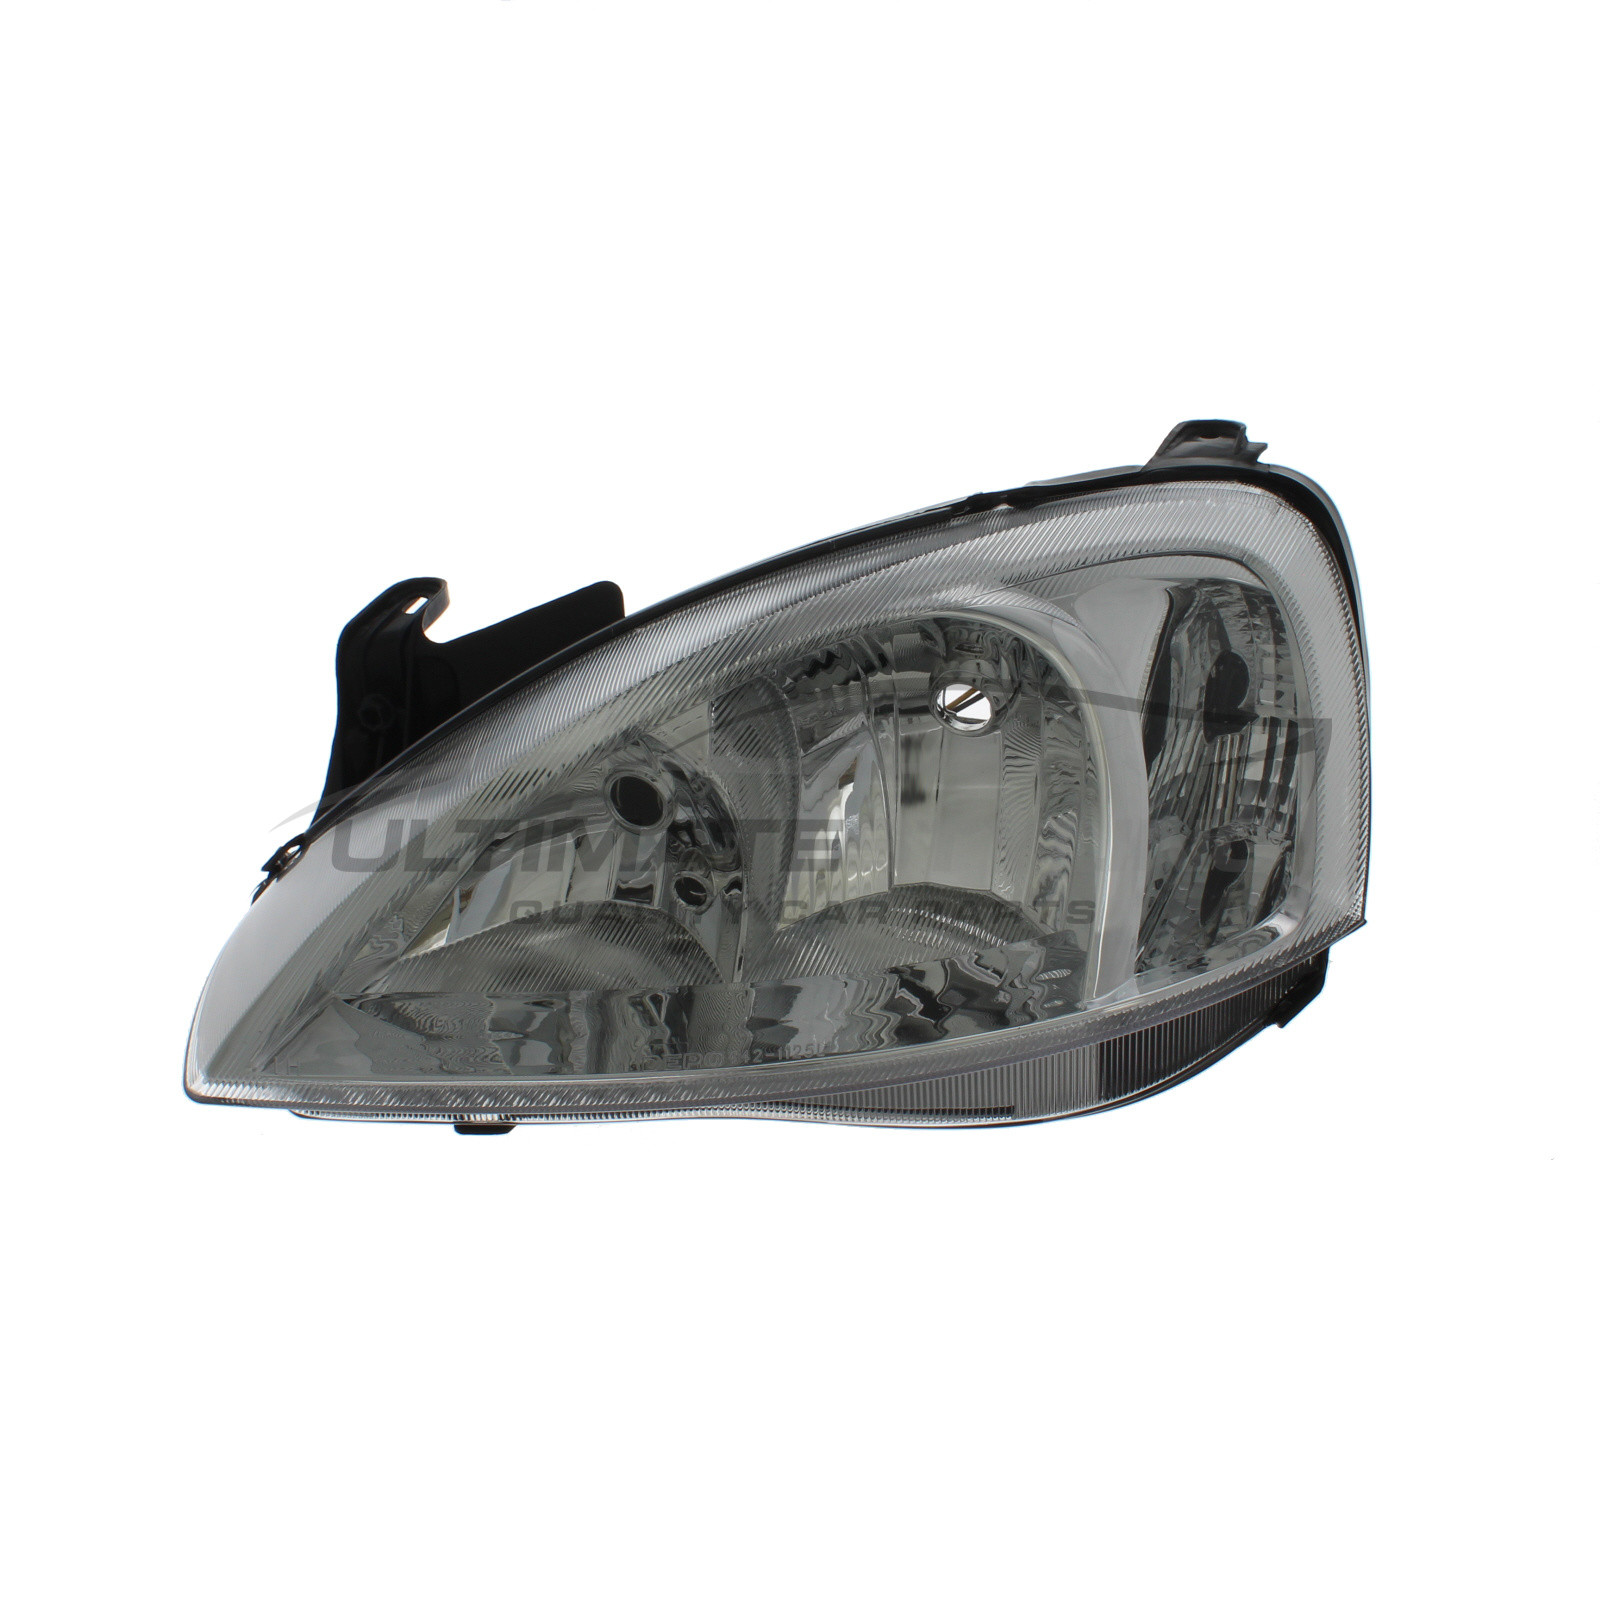 Vauxhall Combo 2002-2006, Corsa 2003-2006 Halogen, Electric Without Motor, Chrome Headlight / Headlamp Including Crystal Clear Indicator (Non-Projector Type) Passengers Side (LH)